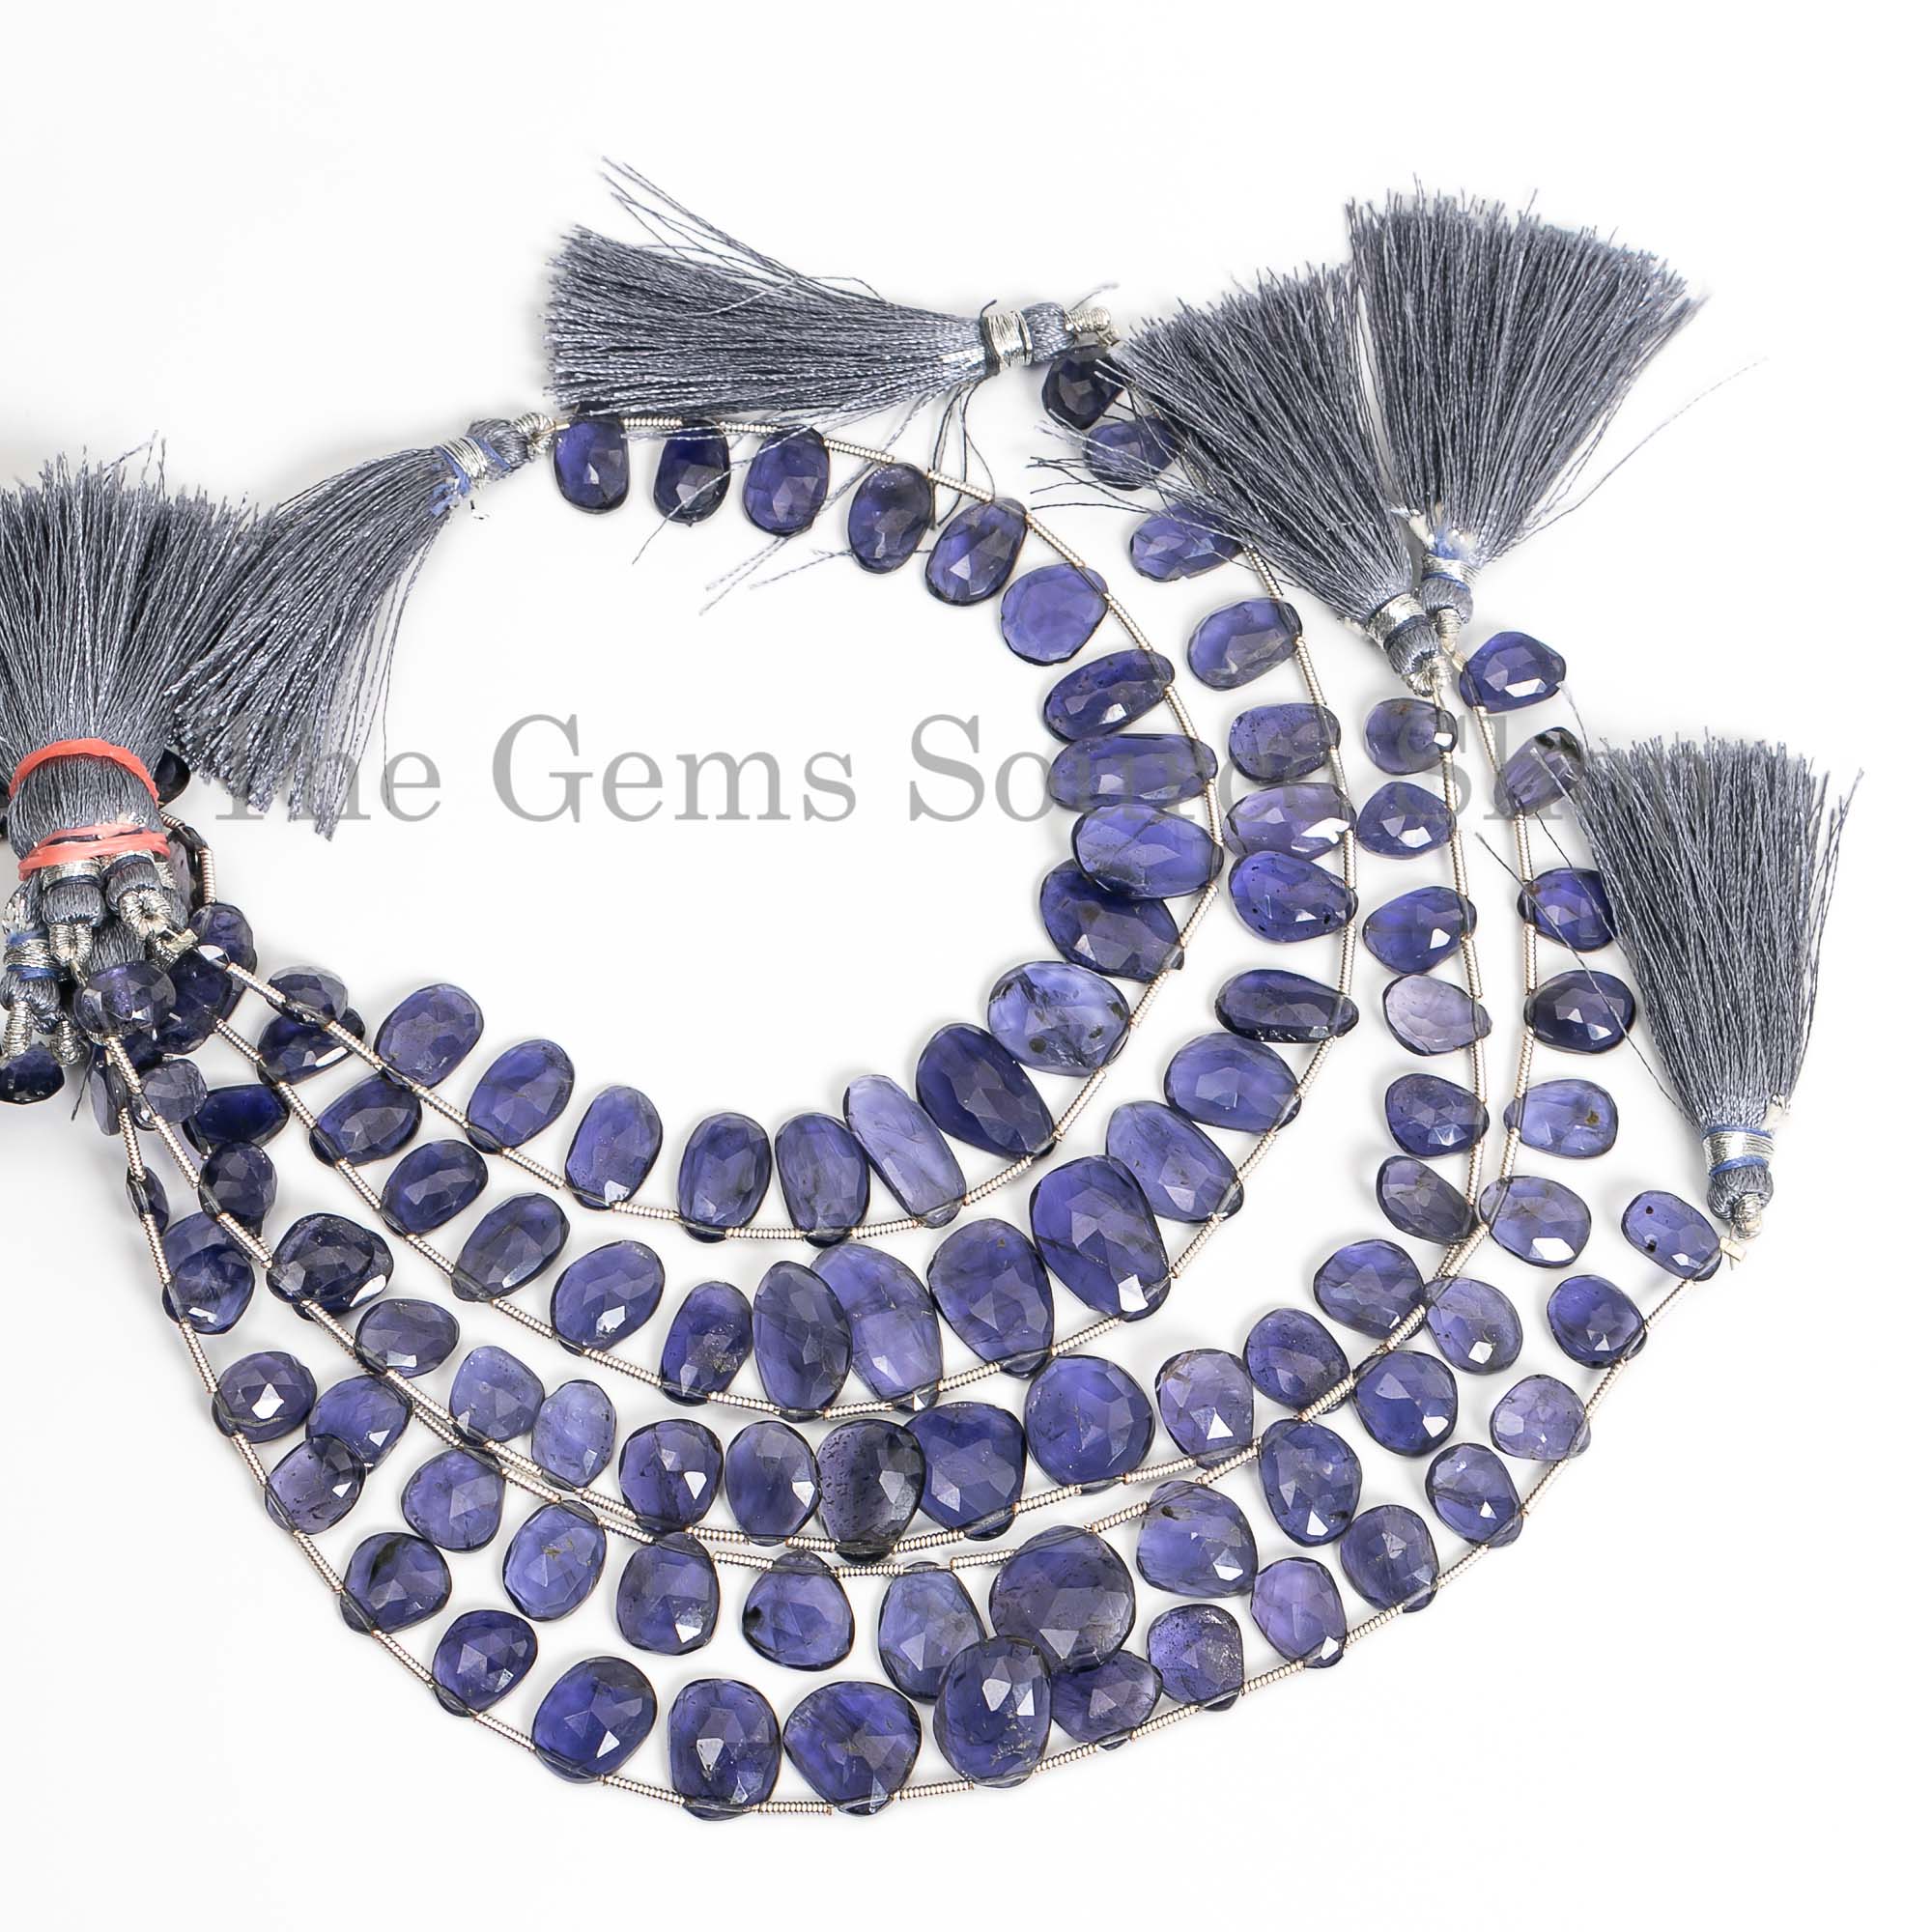 Iolite Faceted Flat Fancy Beads, Iolite Beads, Iolite Fancy Beads, Flat Fancy Beads, Gemstone Beads